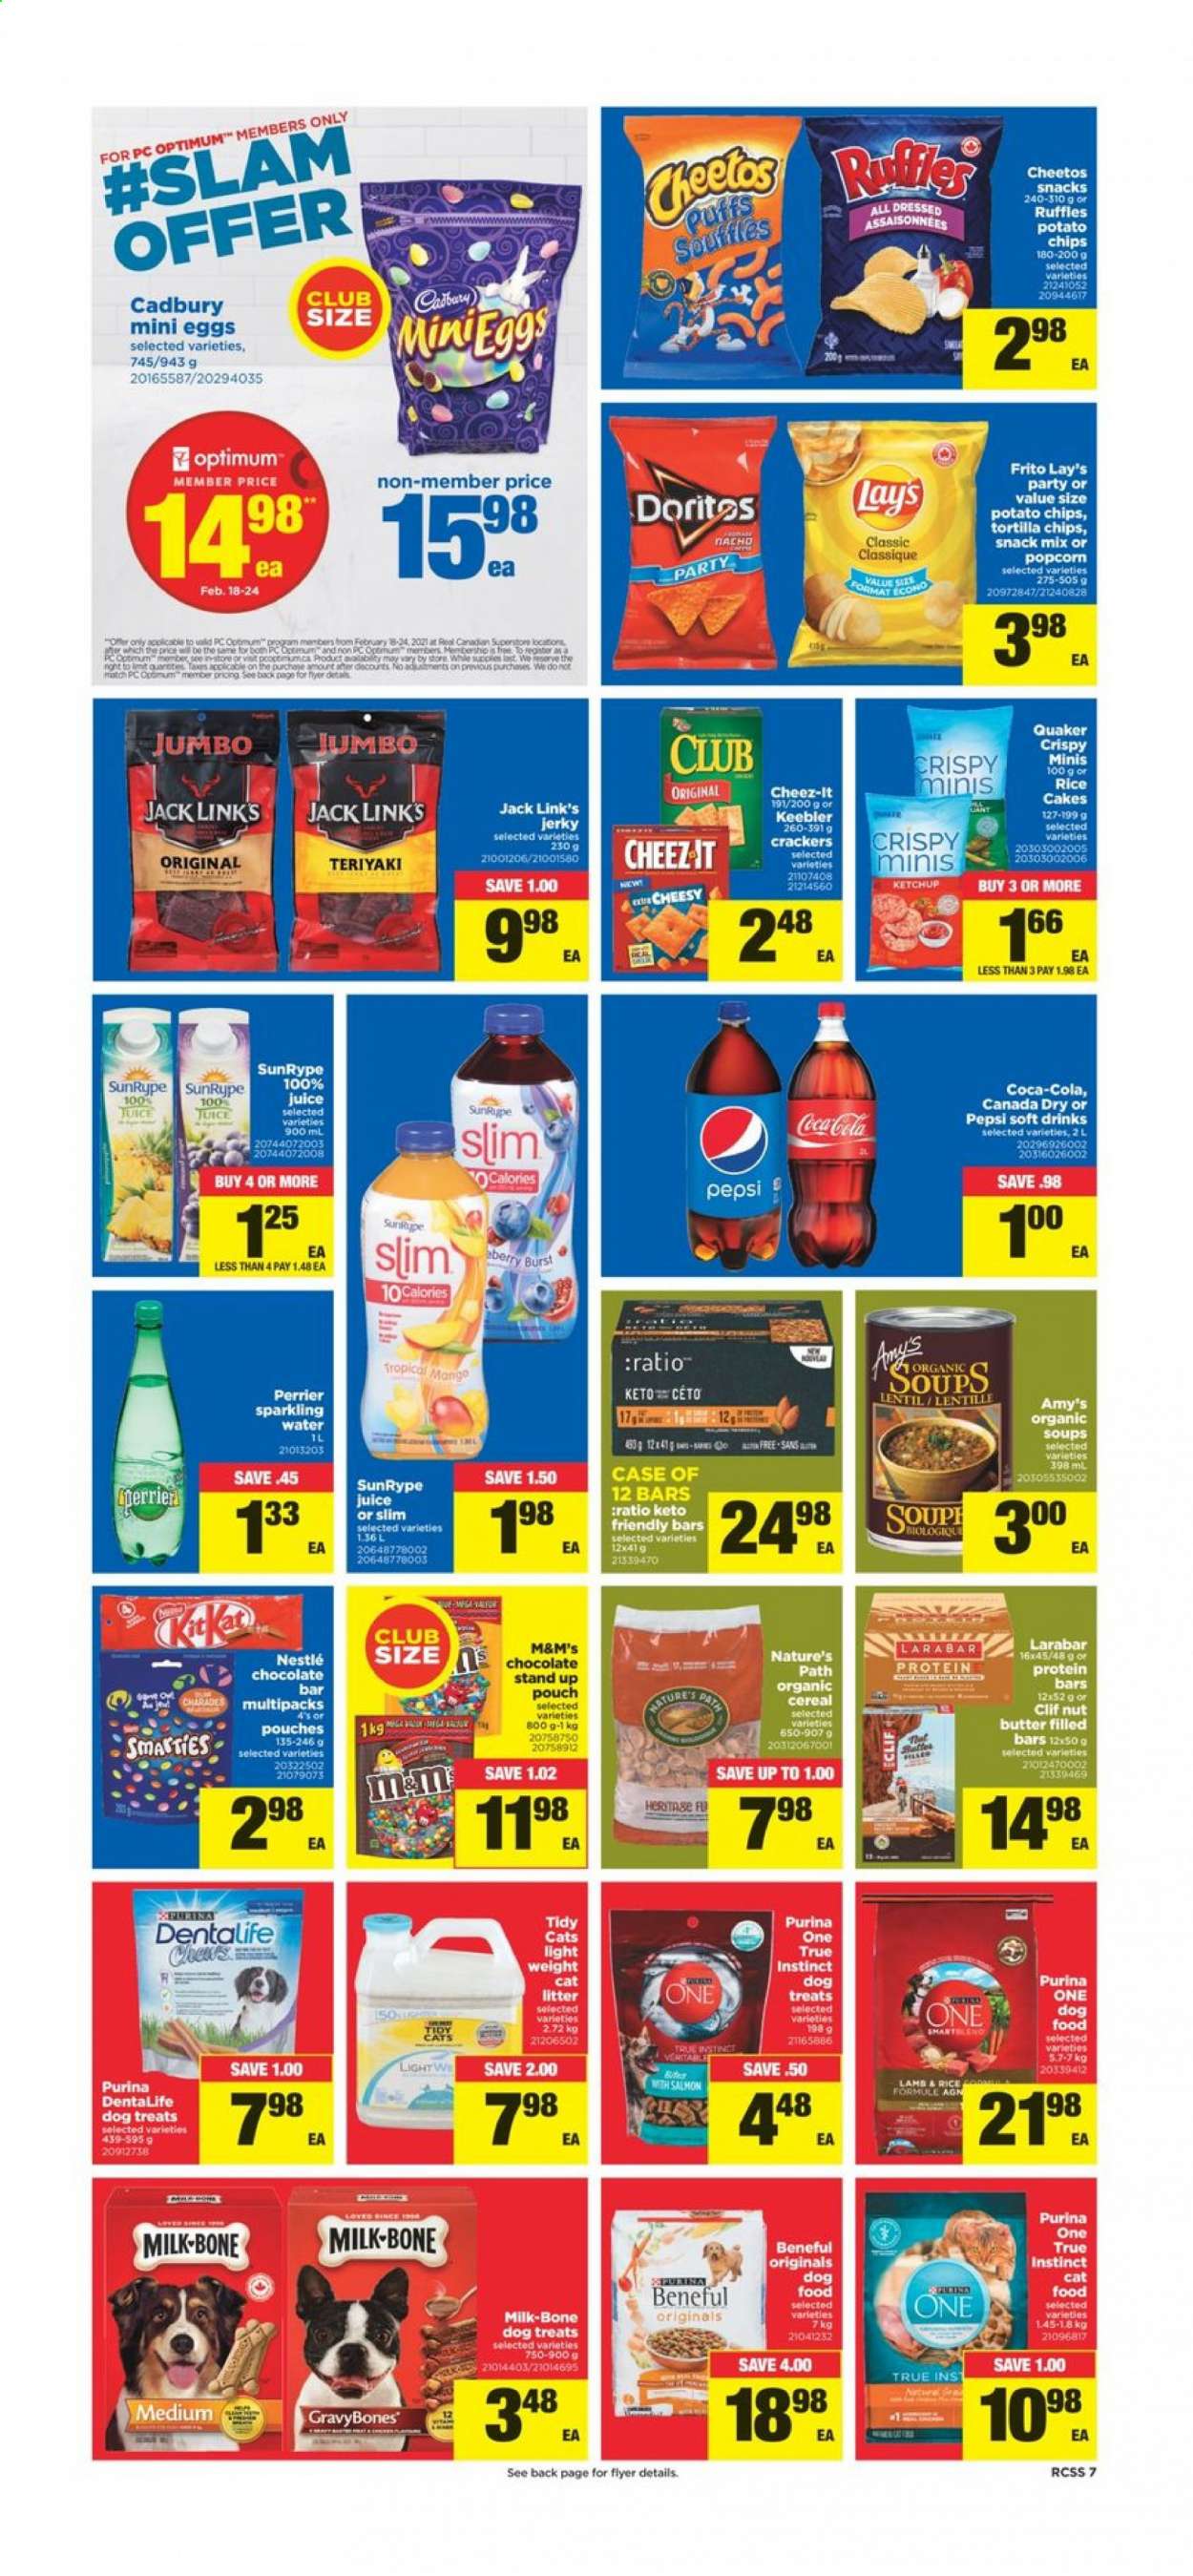 thumbnail - Real Canadian Superstore Flyer - February 18, 2021 - February 24, 2021 - Sales products - puffs, Quaker, jerky, milk, snack, crackers, Cadbury, Keebler, chocolate bar, Doritos, tortilla chips, potato chips, Cheetos, Lay’s, Cheez-It, Ruffles, Jack Link's, cereals, protein bar, nut butter, Canada Dry, Coca-Cola, Pepsi, juice, soft drink, Perrier, sparkling water, cat litter, animal food, cat food, dog food, Purina, Optimum, Dentalife, Nestlé, chips, M&M's. Page 7.